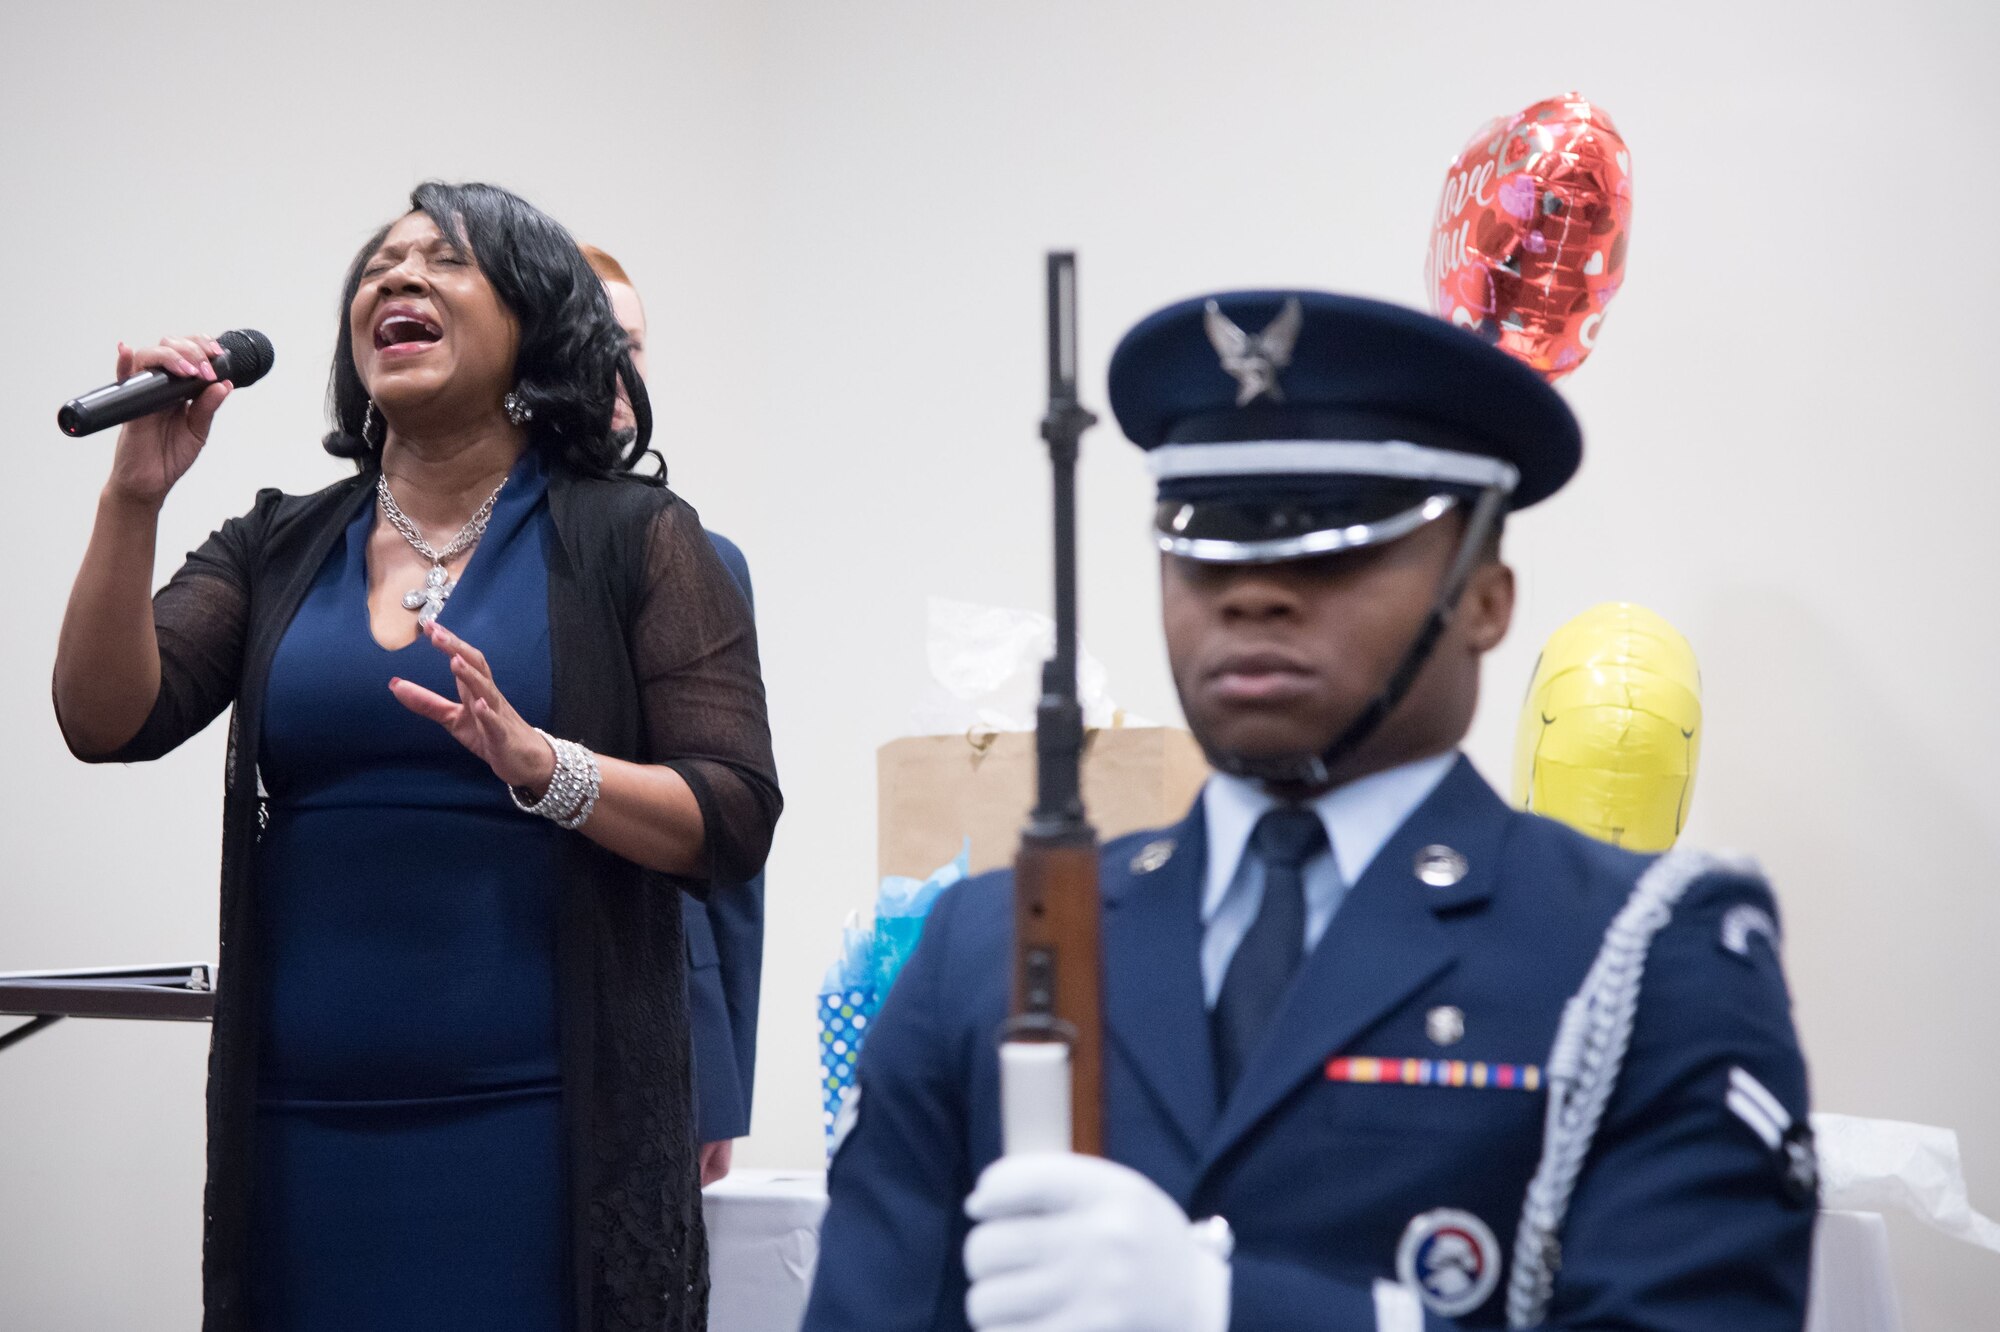 Catherine Brinson sings the National Anthem during a retirement ceremony for Gary Wallace, 53rd Weather Reconnaissance Squadron aviation resource management technician, Feb. 2, 2018 at Keesler Air Force Base, Mississippi. (U.S. Air Force photo by Staff Sgt. Heather Heiney)